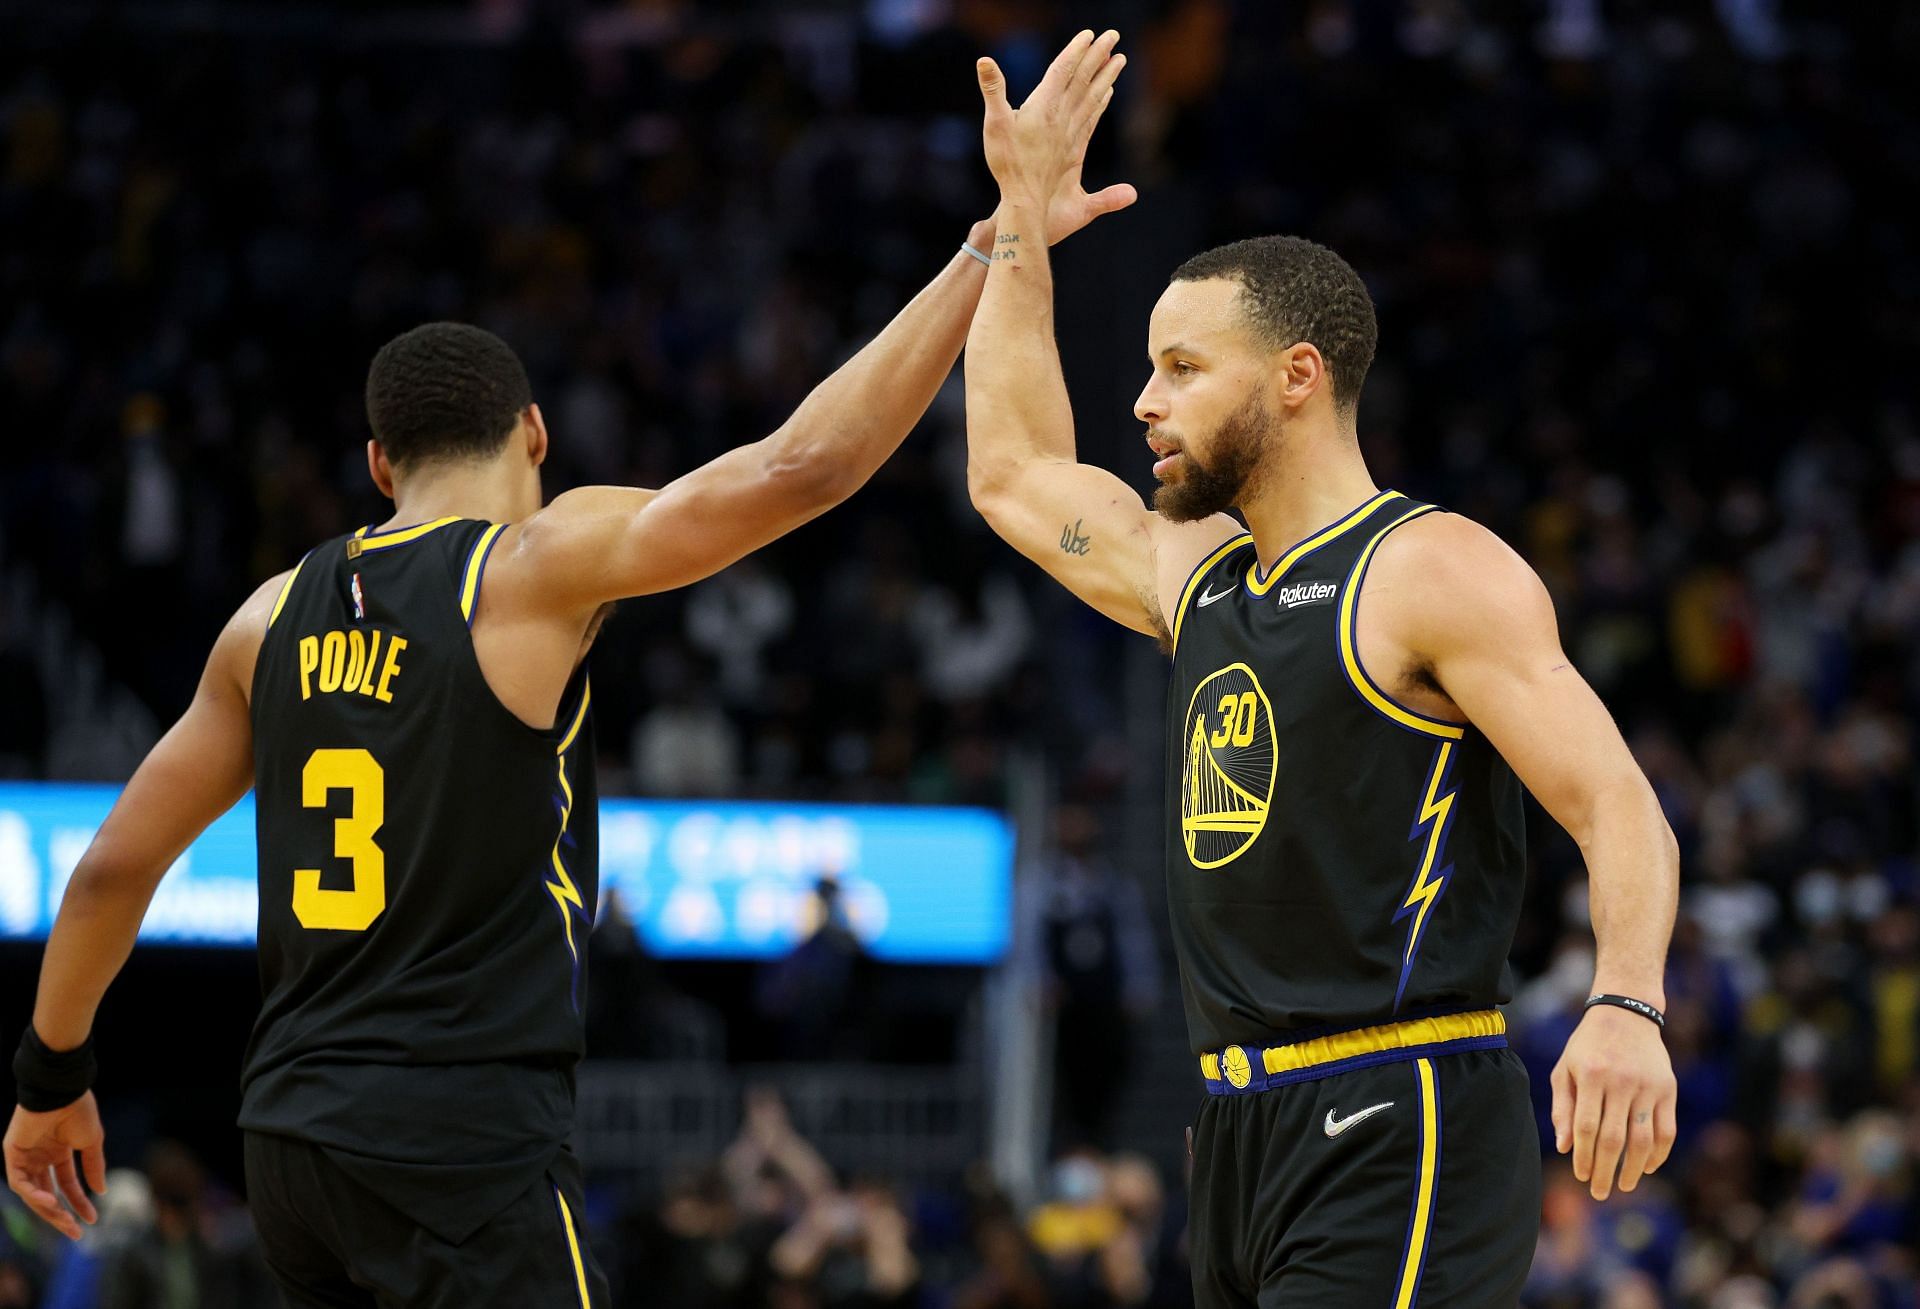 Jordan Poole and Steph Curry of the Golden State Warriors